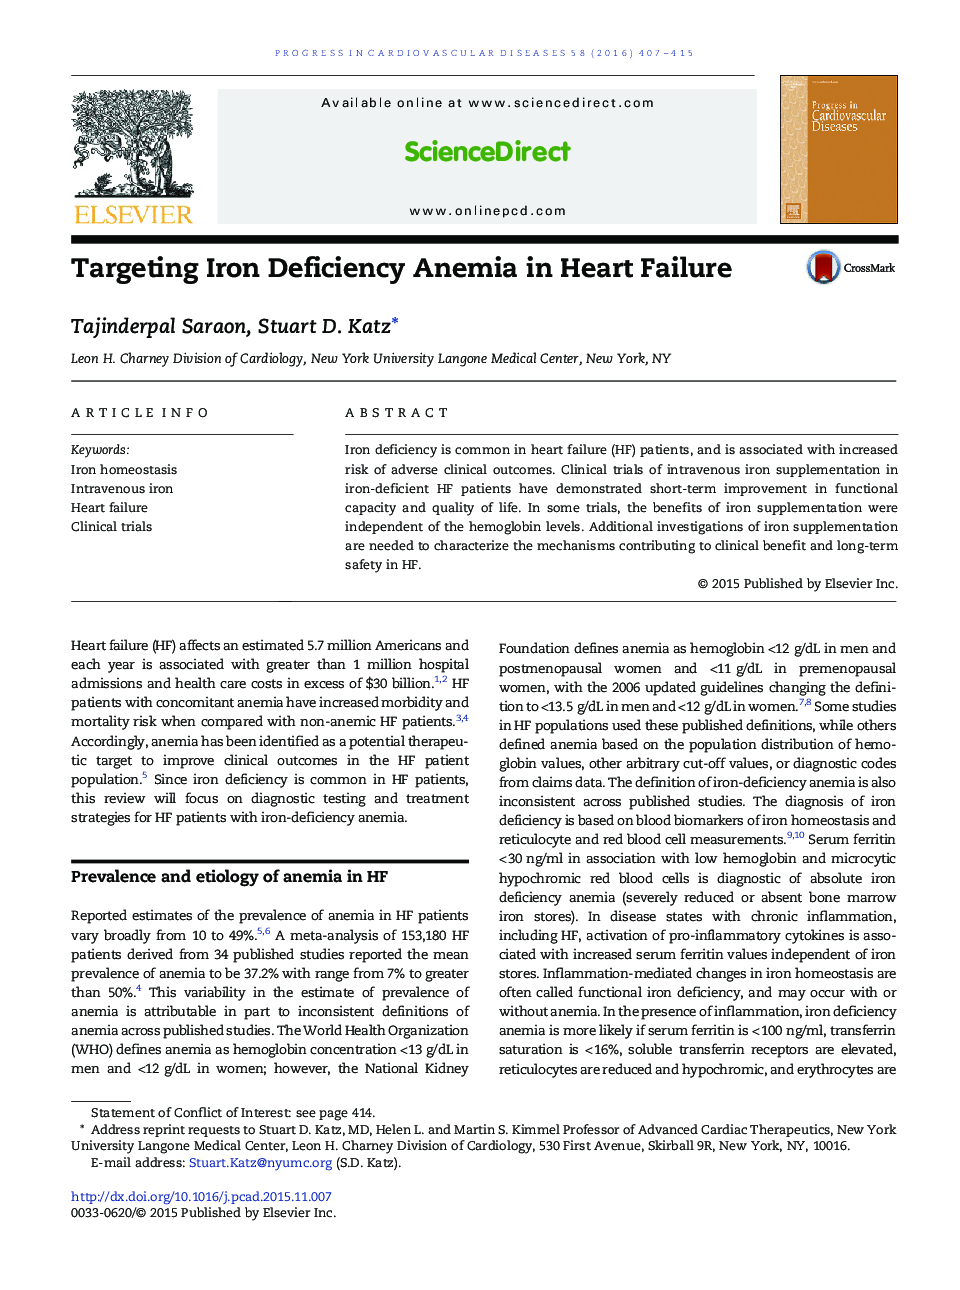 Targeting Iron Deficiency Anemia in Heart Failure 